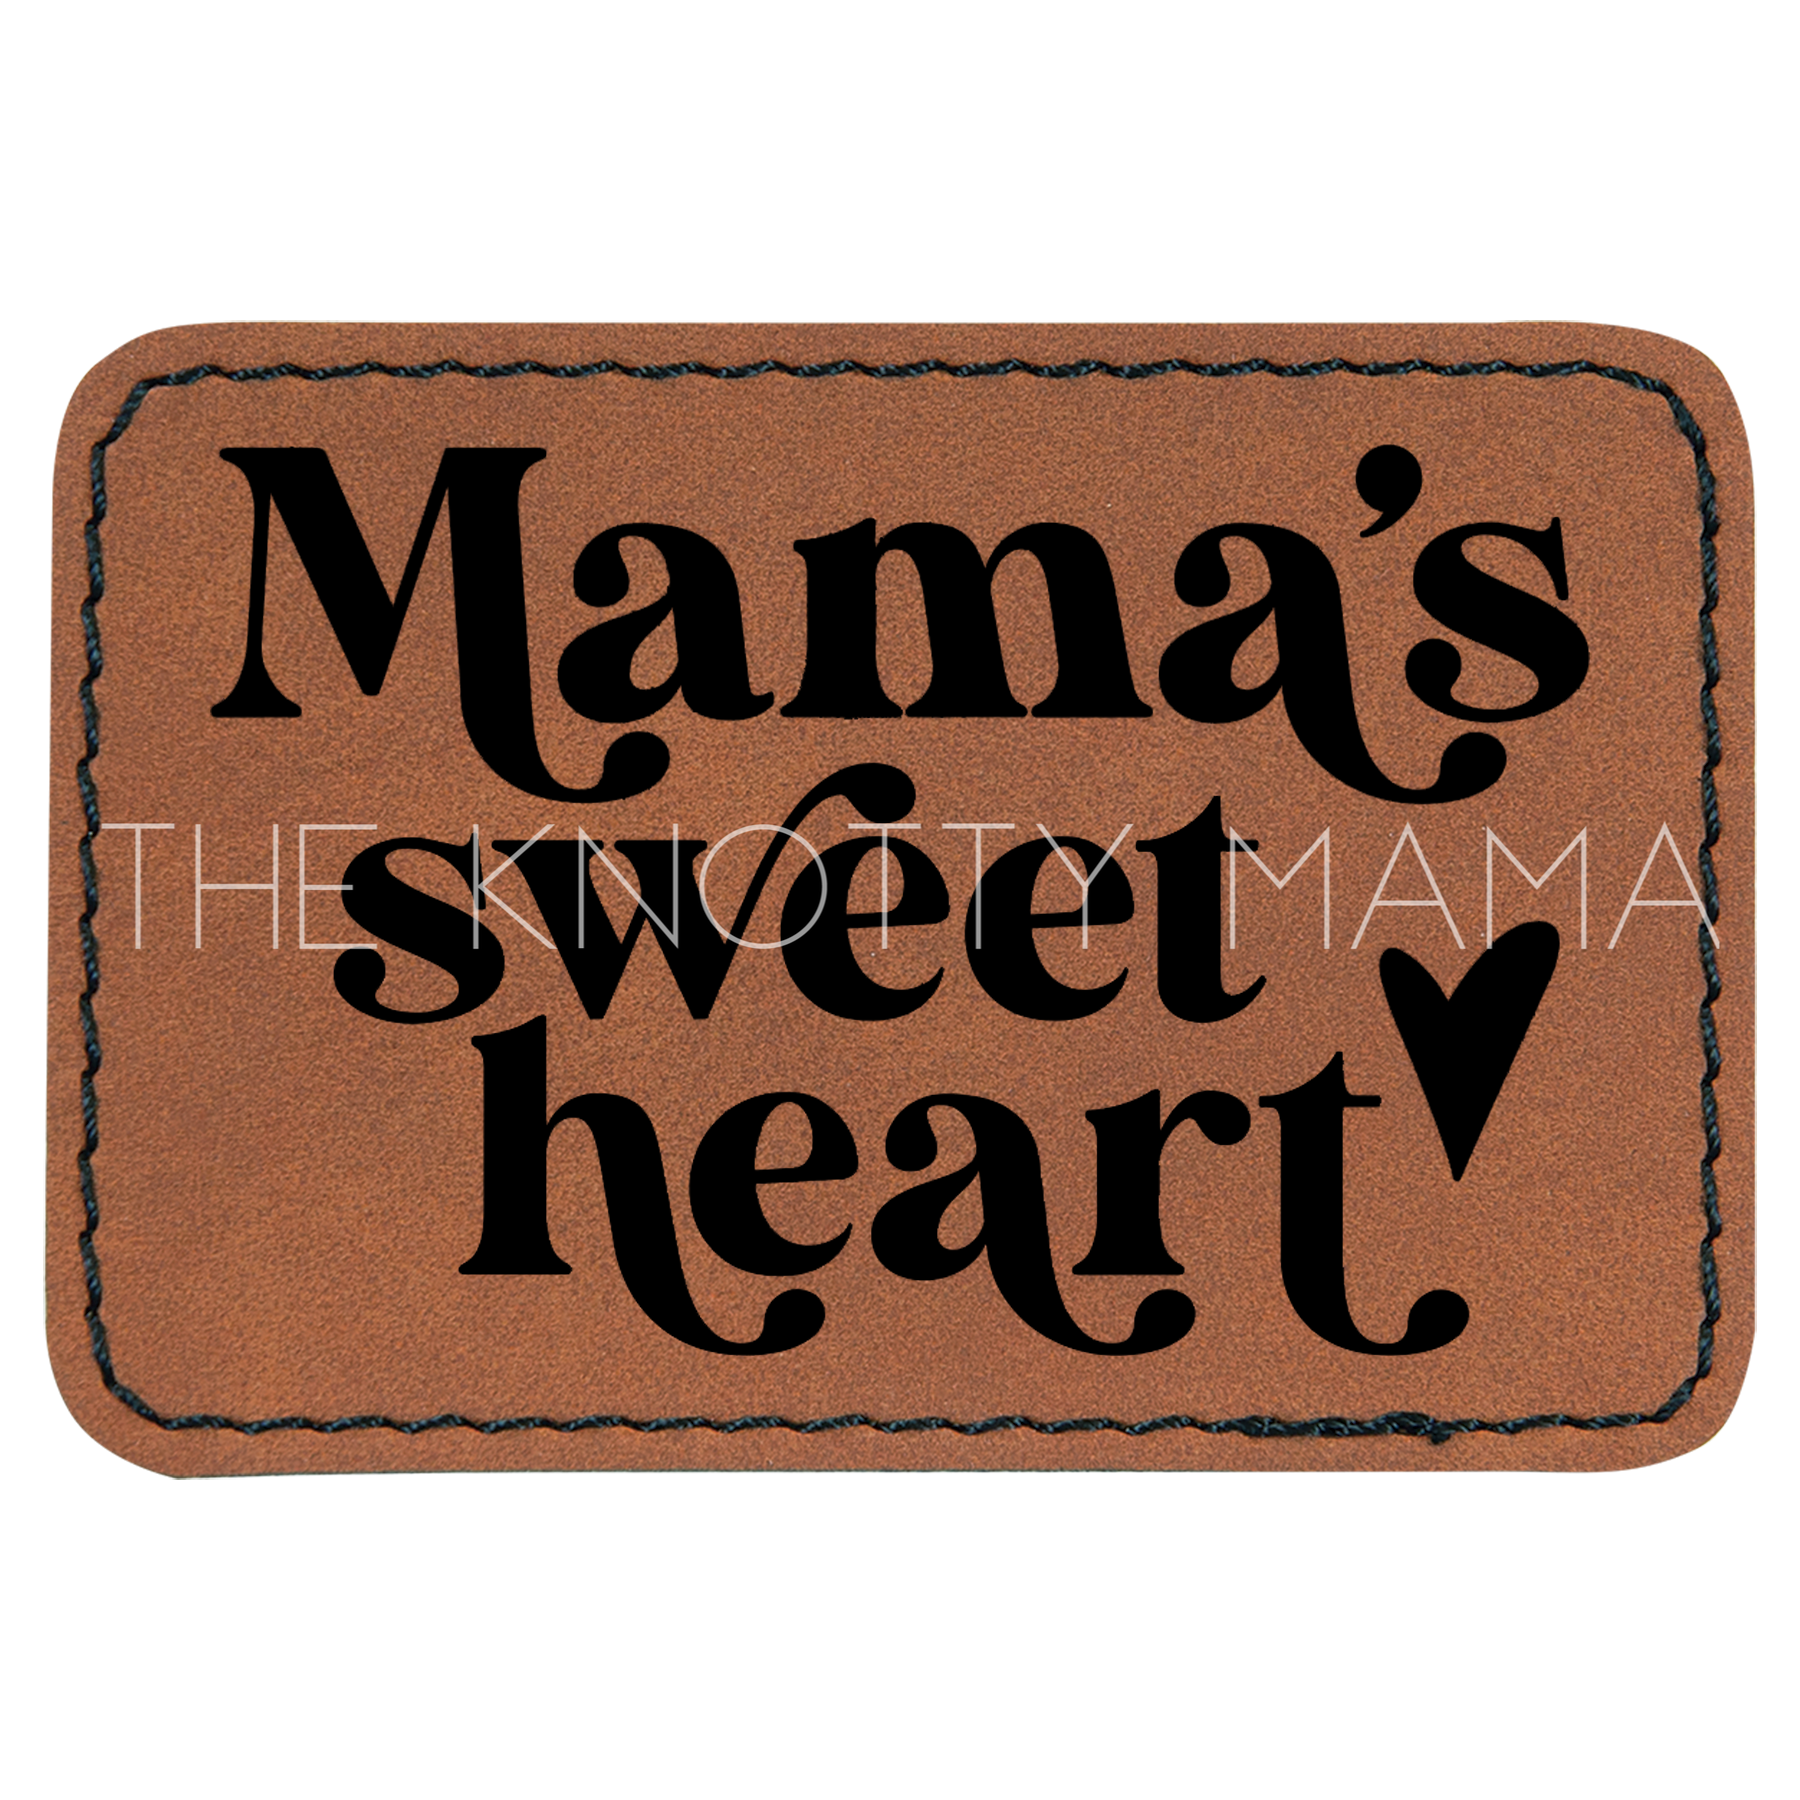 Mama's Sweetheart Patch